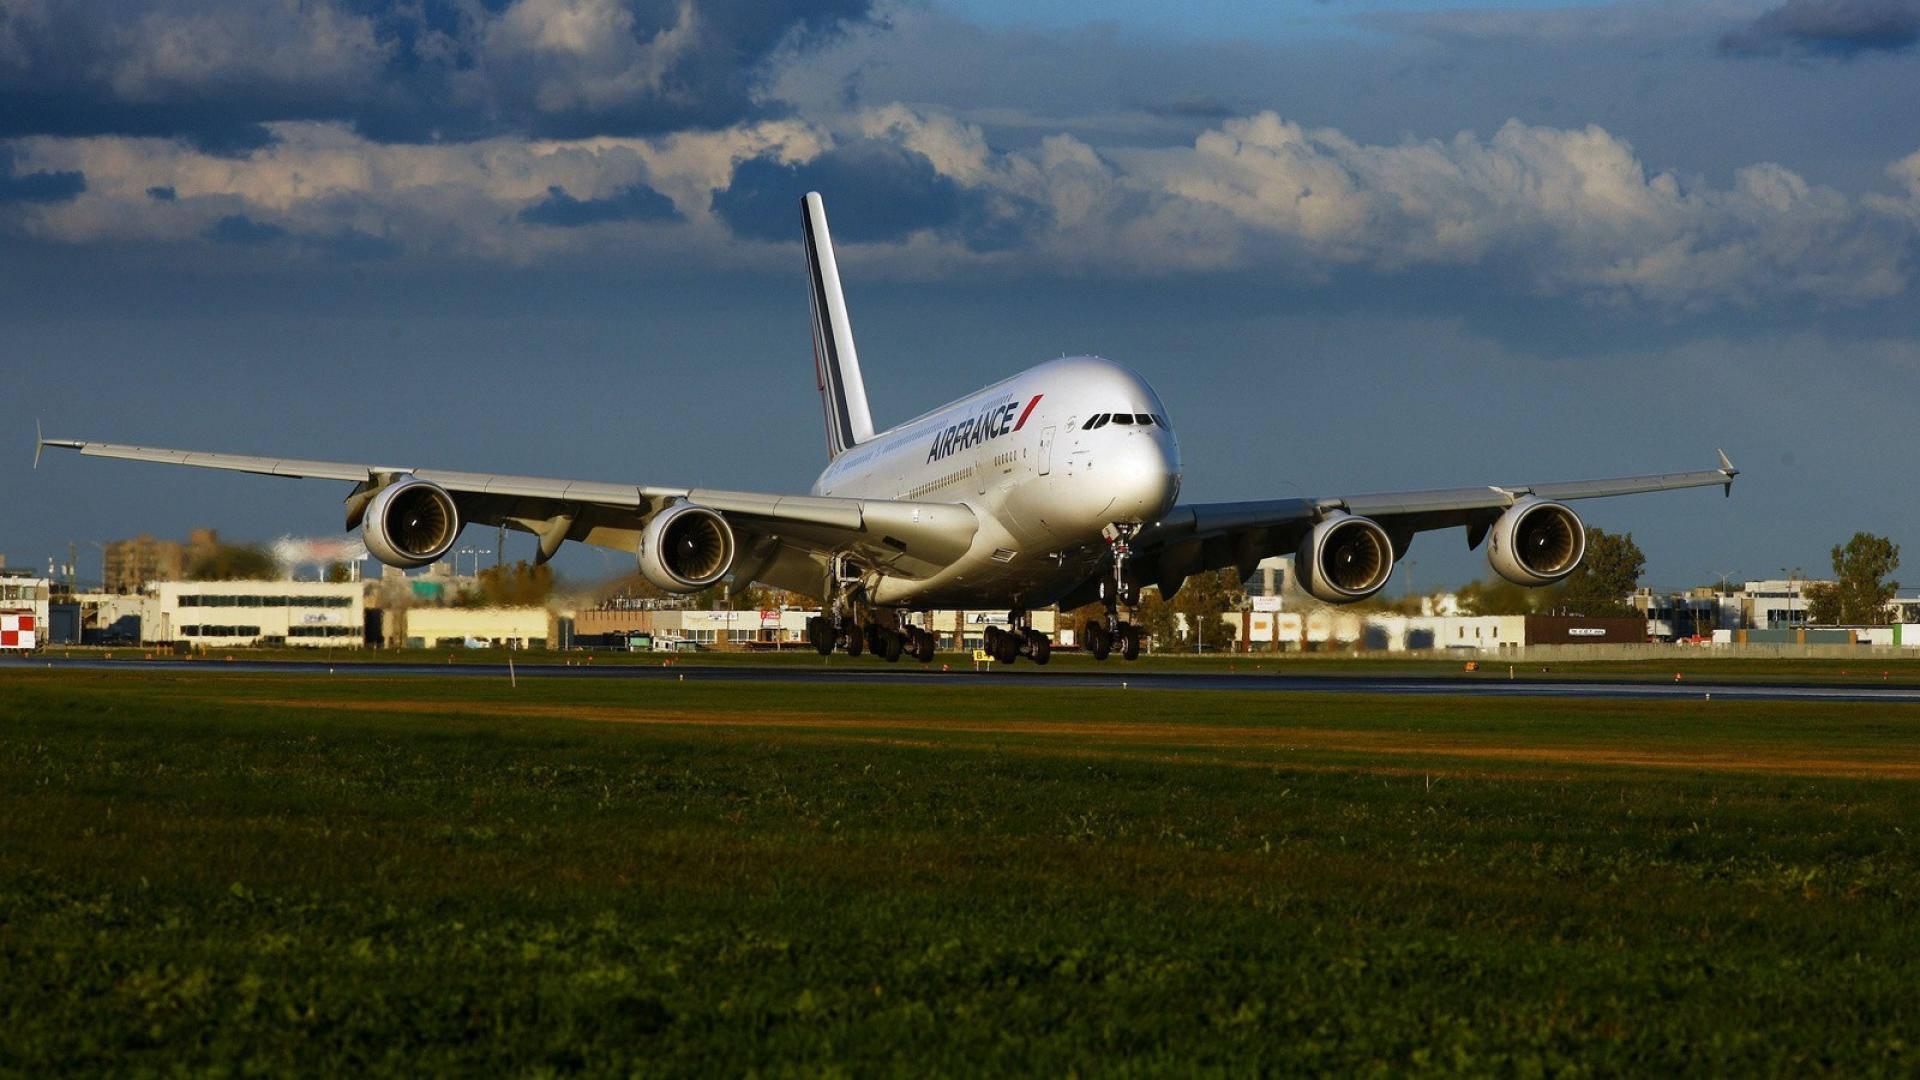 Aesthetic Air France Airbus A380 Plane On Runway Wallpaper